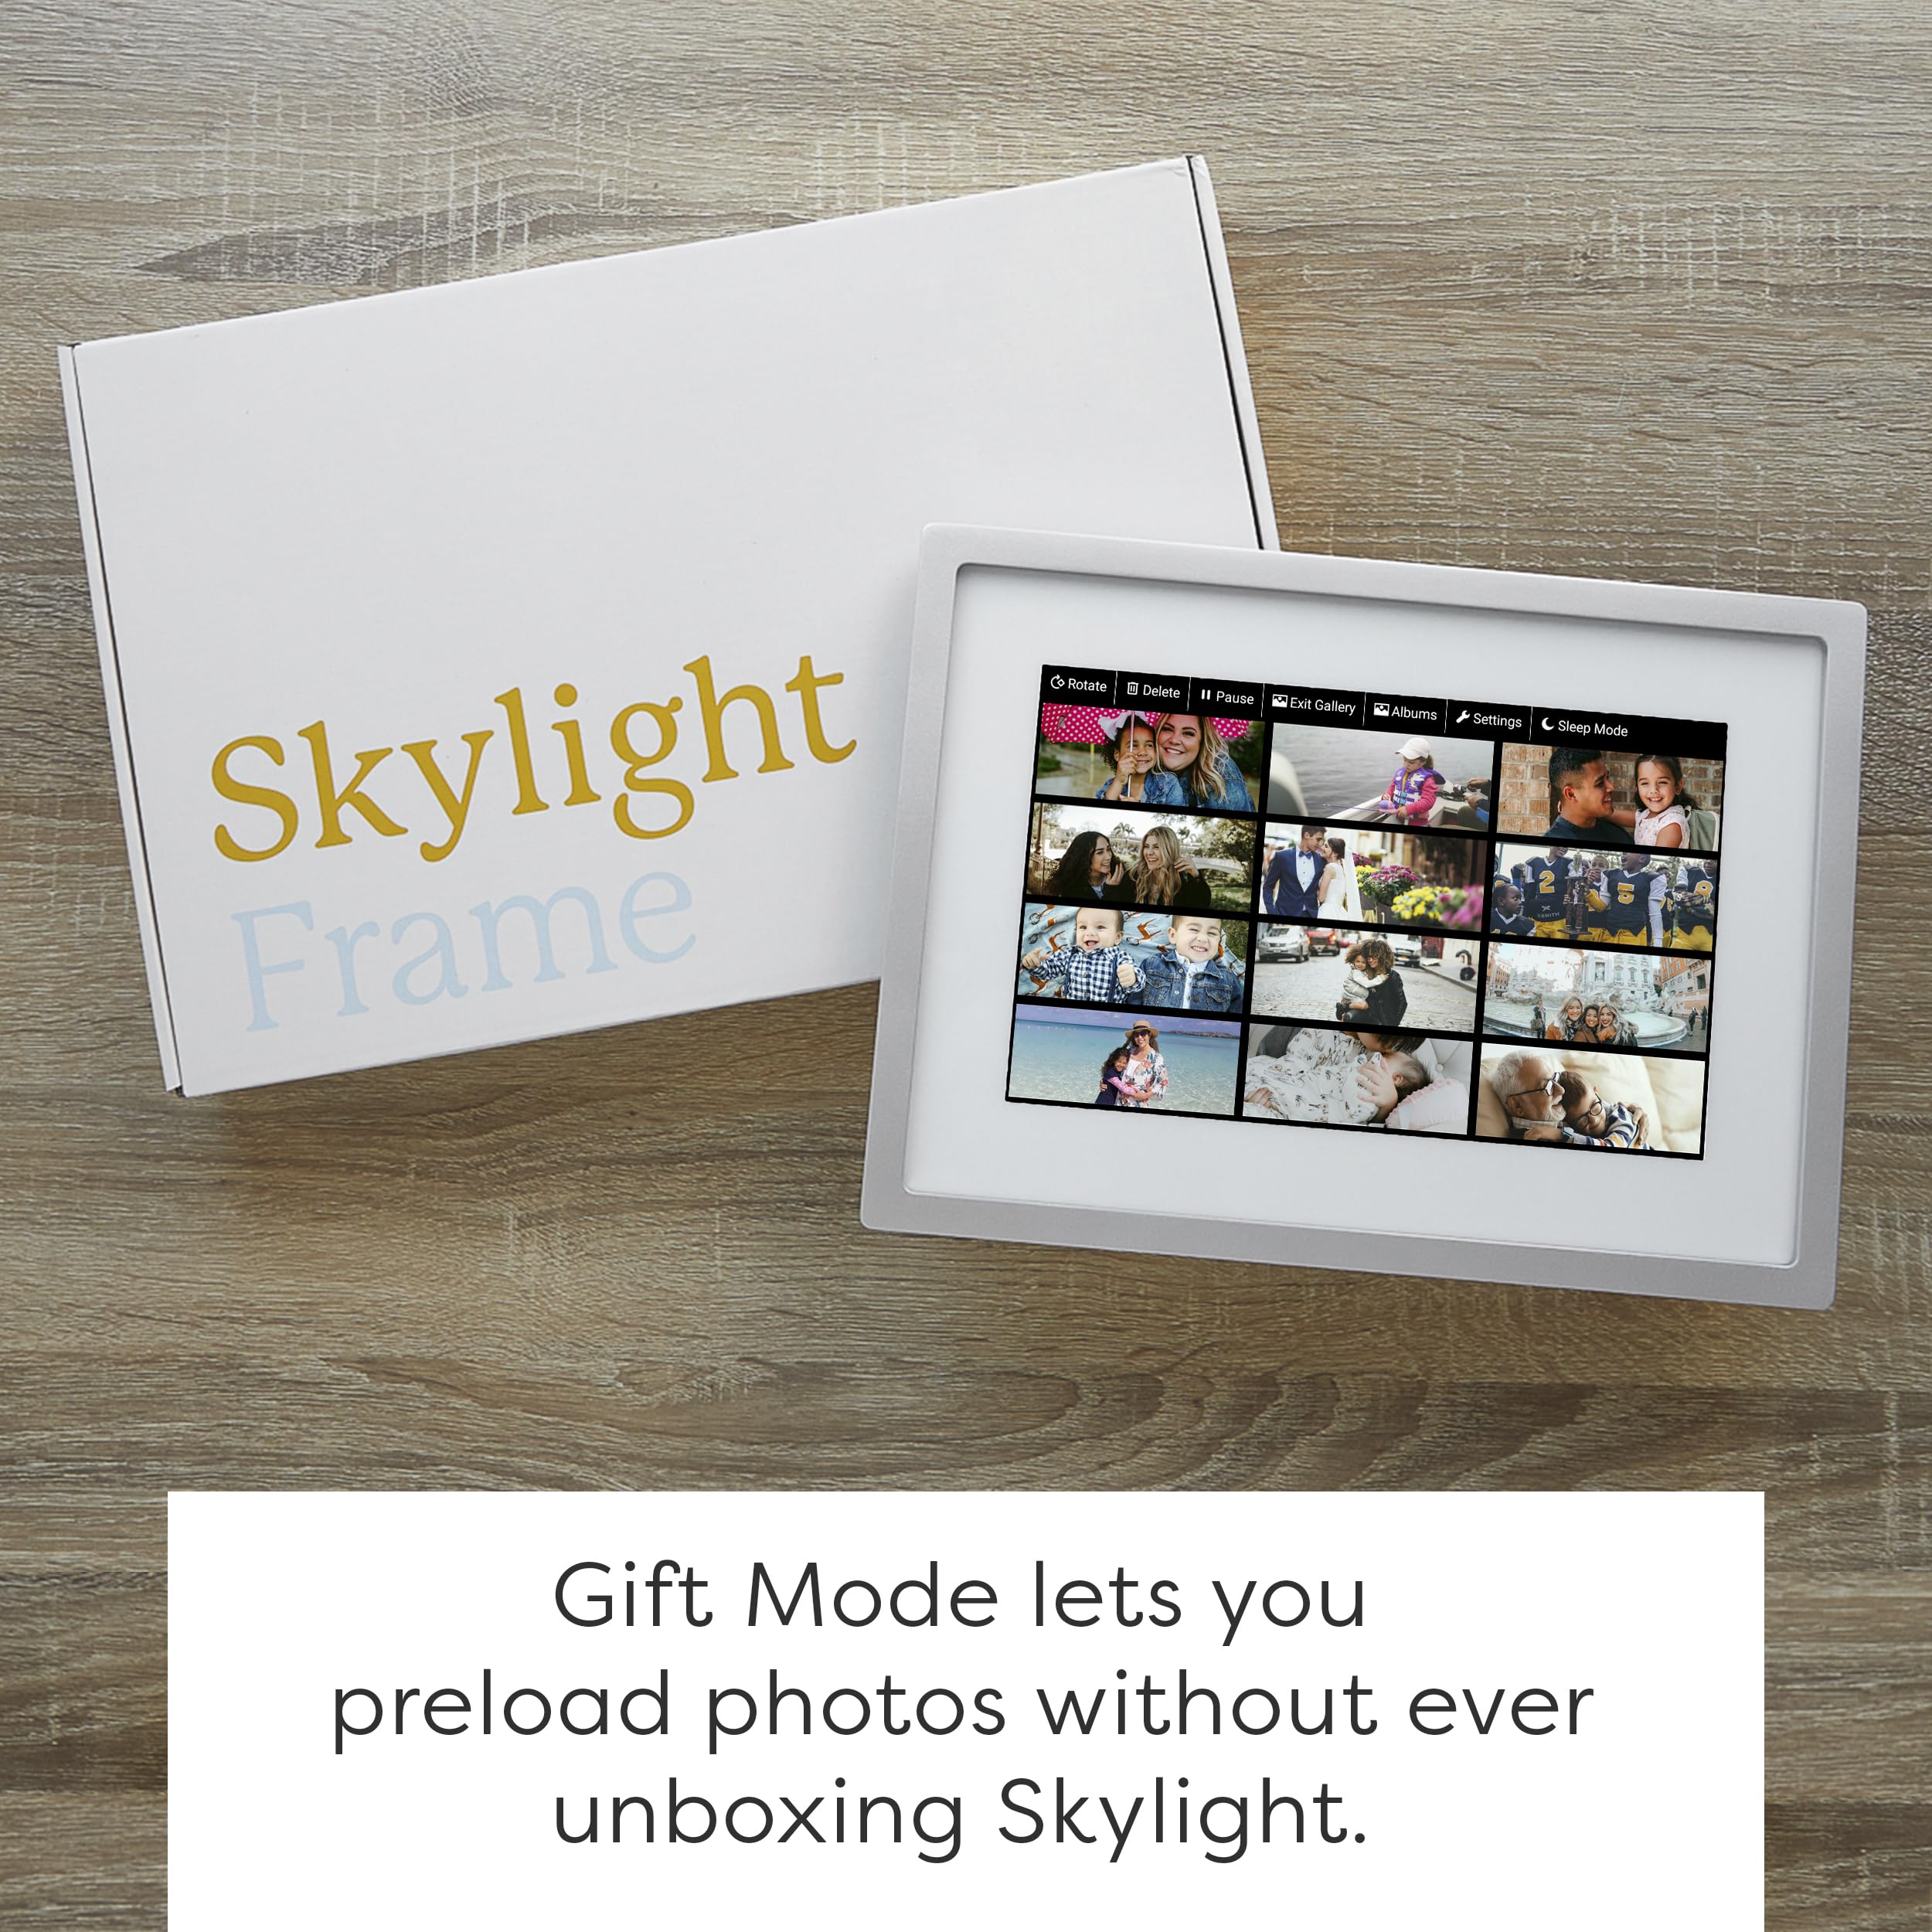 Skylight Digital Picture Frame - WiFi Enabled with Load from Phone Capability, Touch Screen Digital Photo Frame Display - Customizable Gift for Friends and Family - 10 Inch Silver